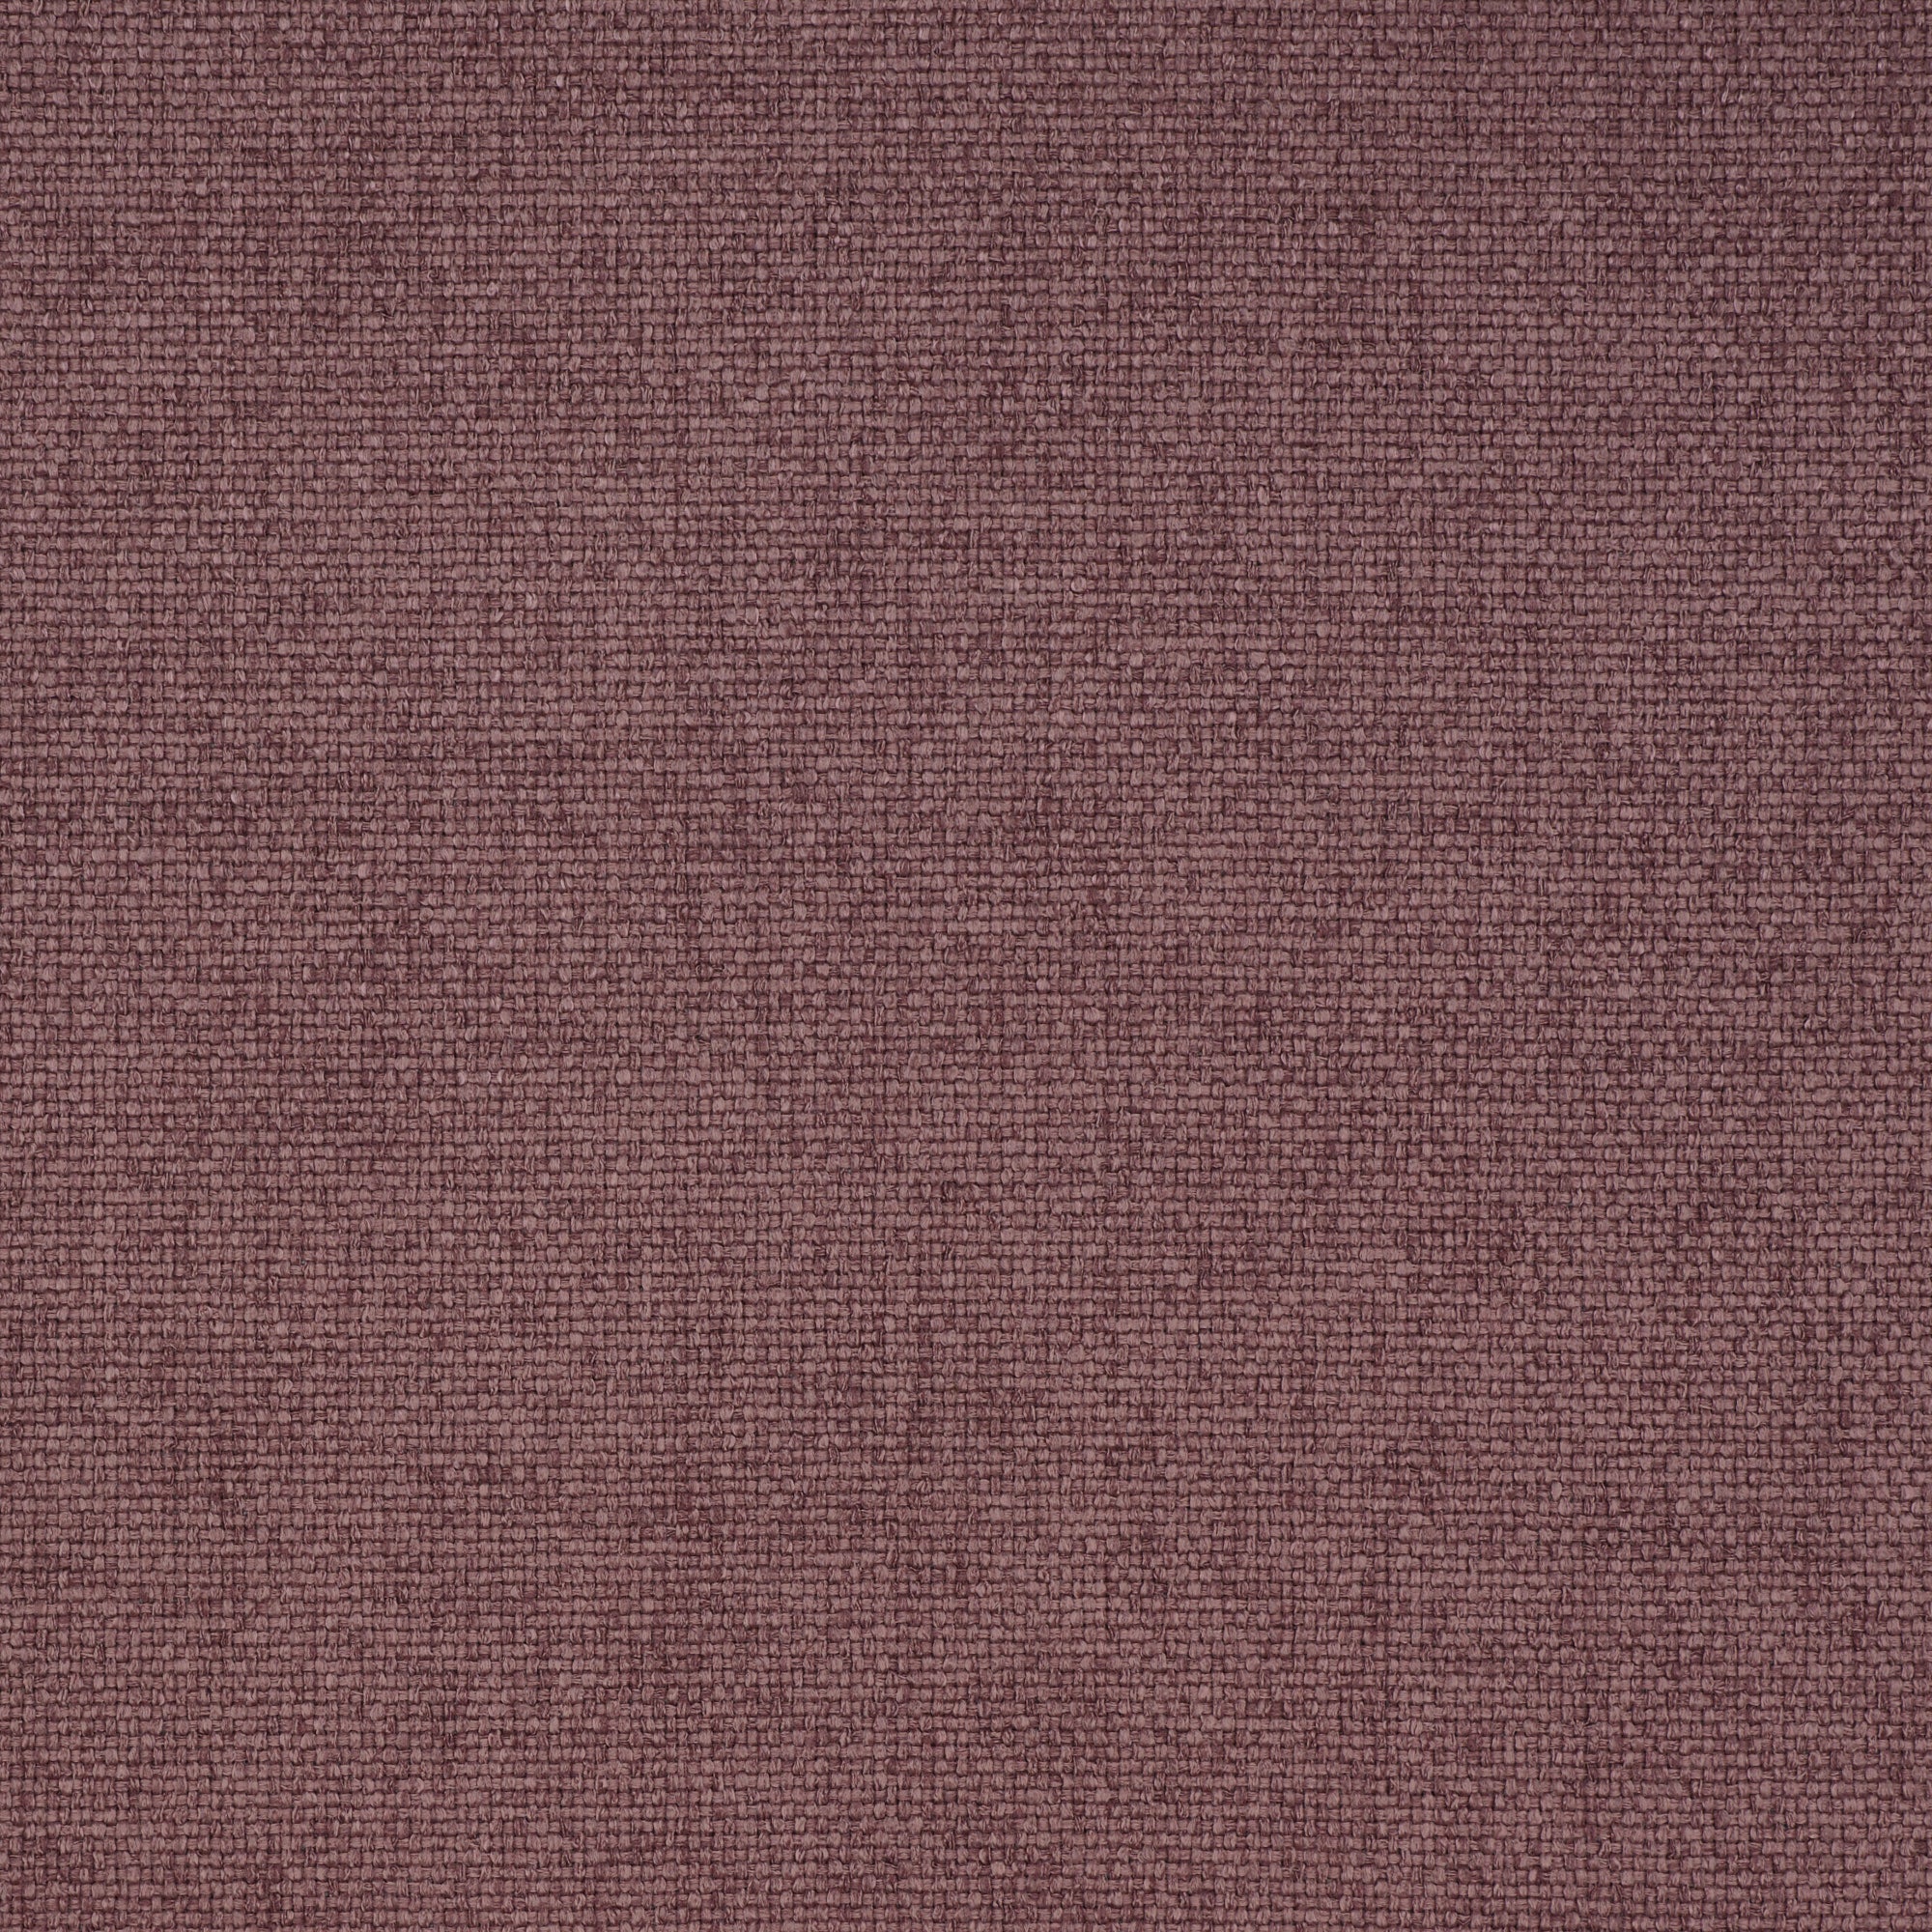 M10717 Shearling Chenille  Fabric Store - Discount Fabric by the Yard